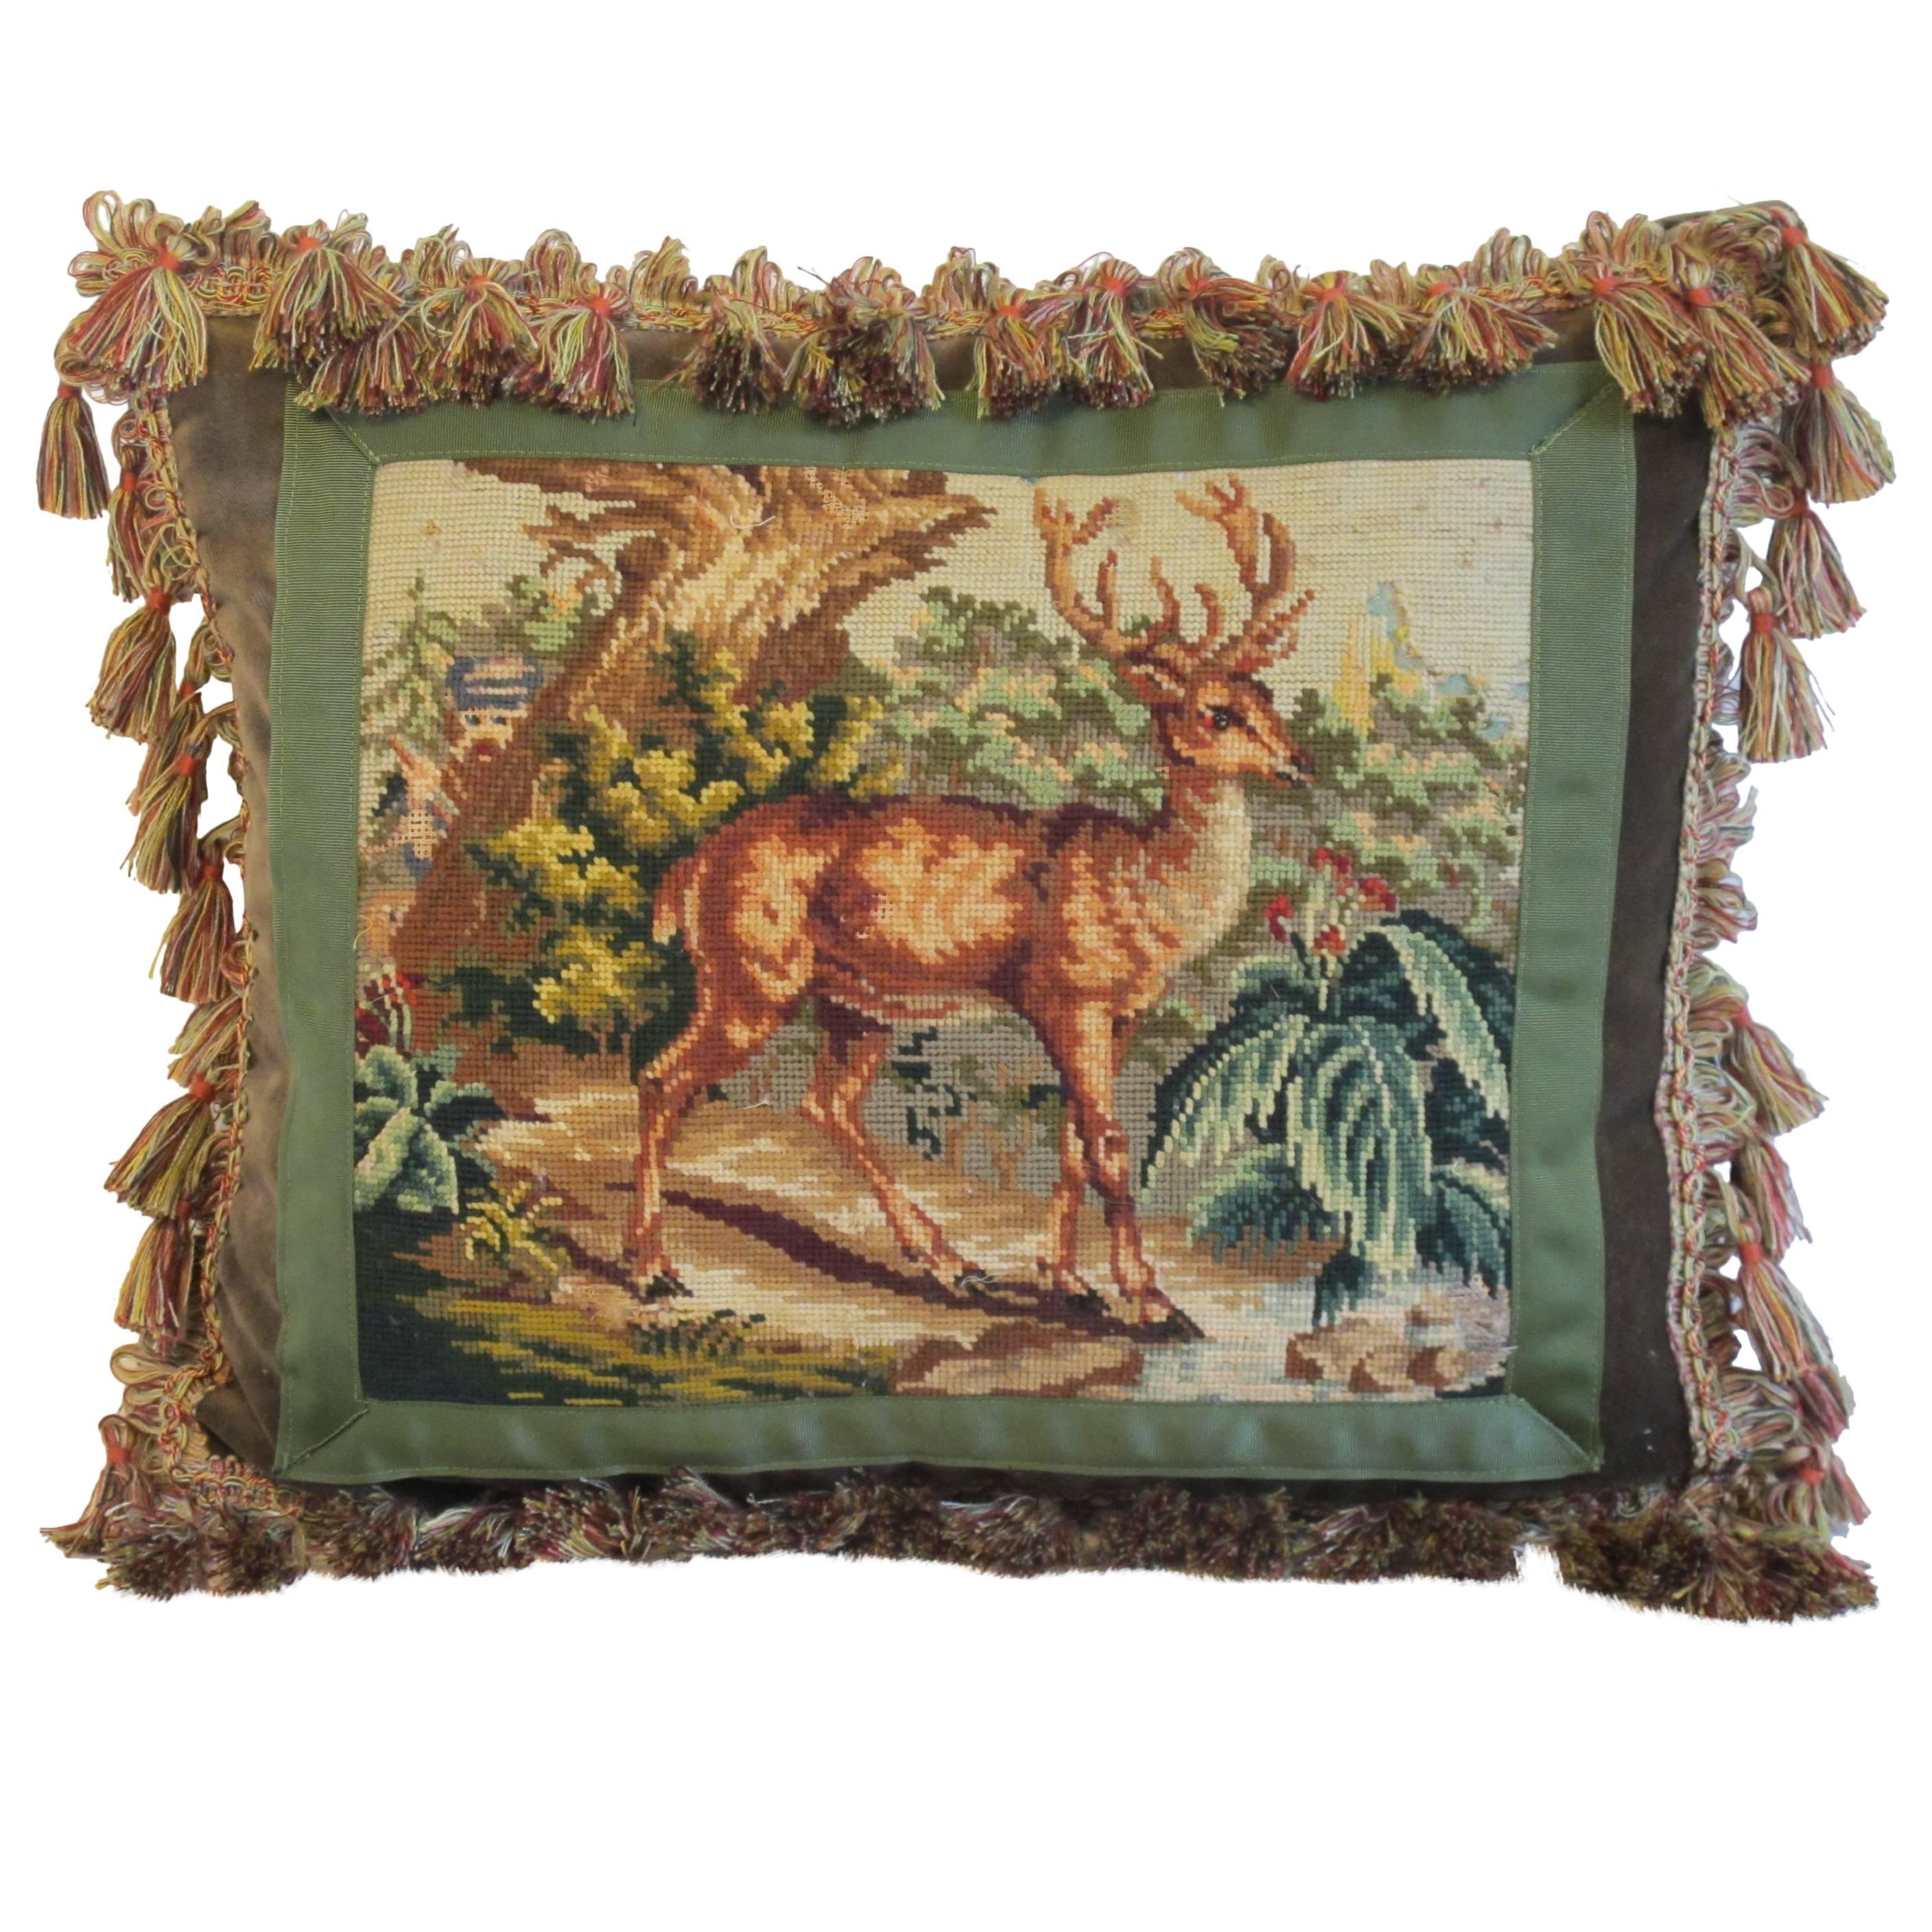 Vintage Needlepoint with Deer by Mary Jane McCarty